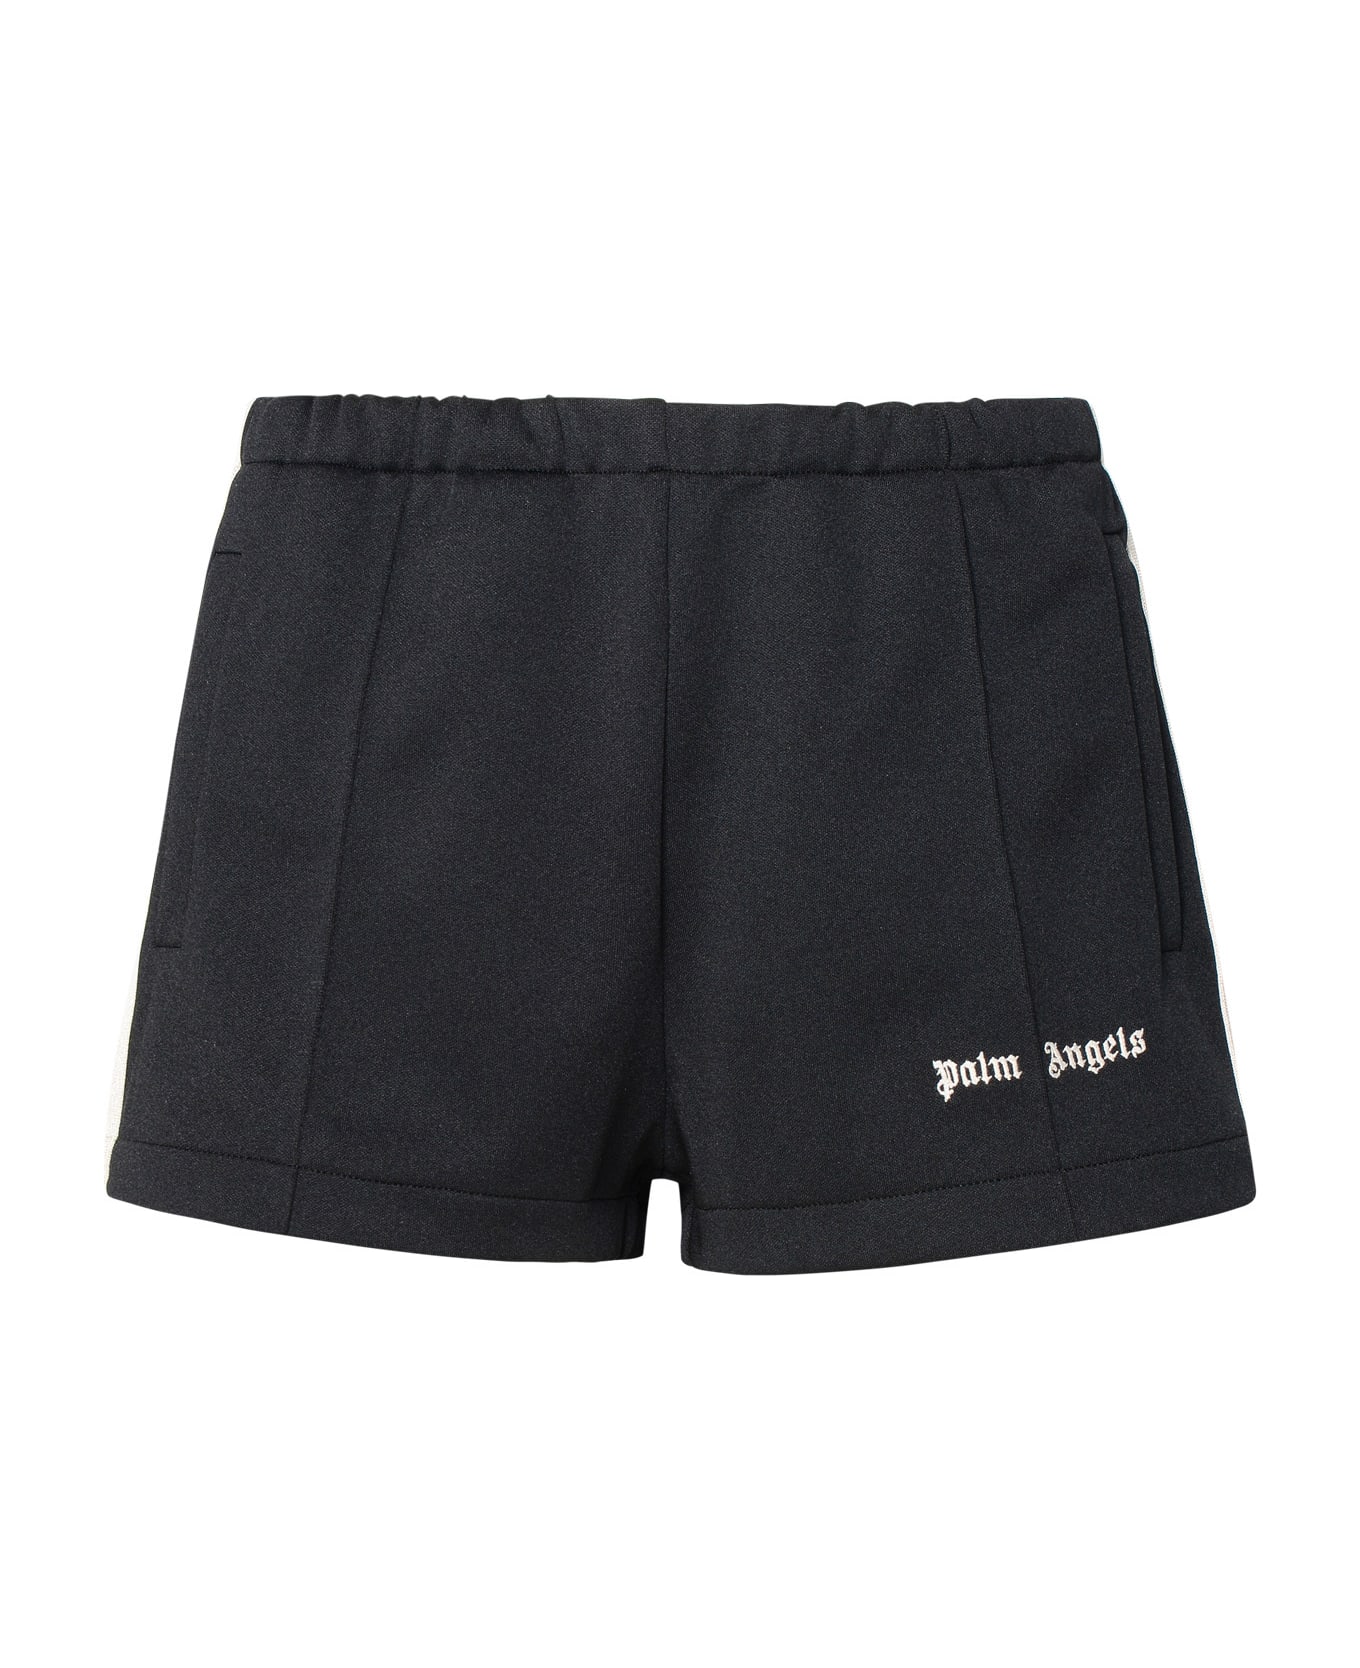 Palm Angels Black Polyester Sporty Shorts - Black off